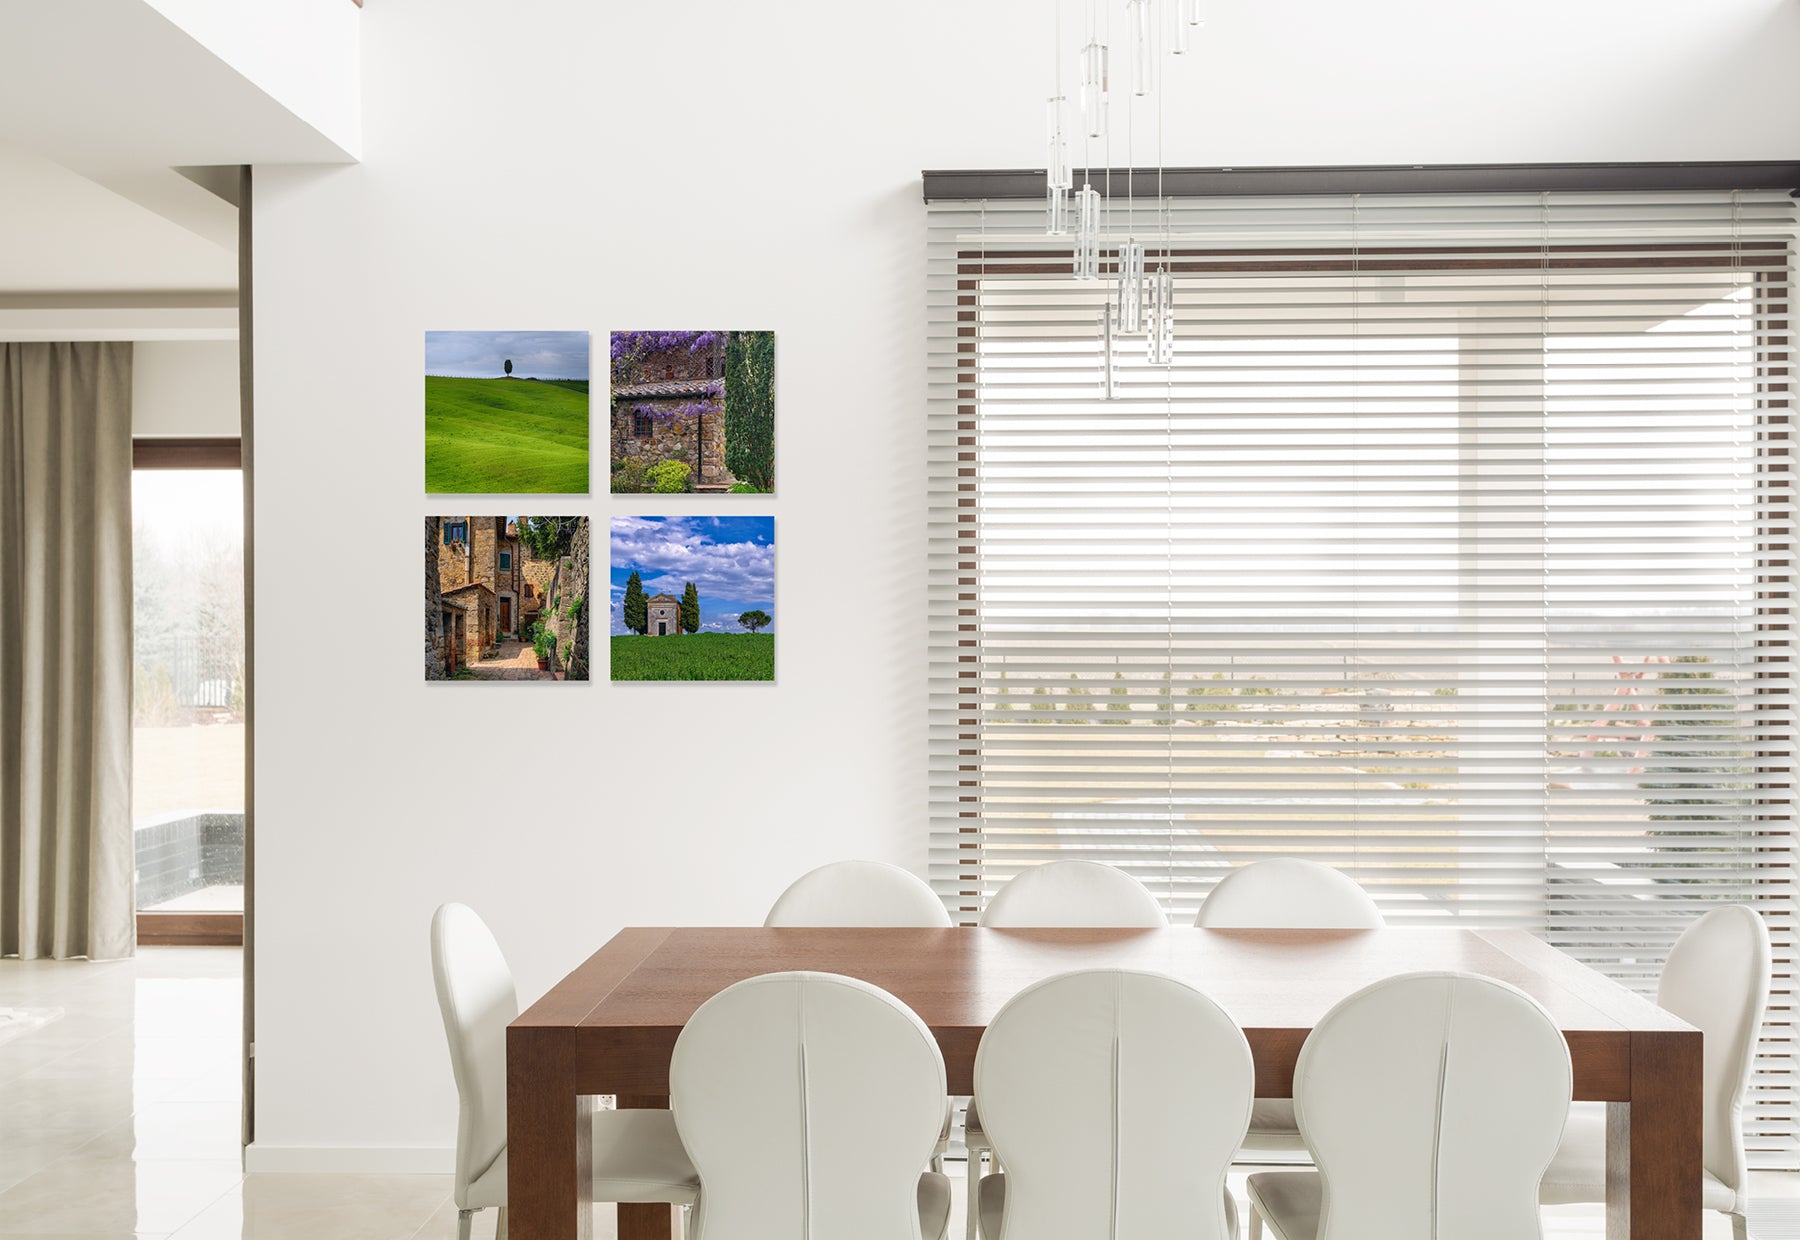 Residential dining room with brown table and white chairs featuring four framed photographs of France by Peter Lik